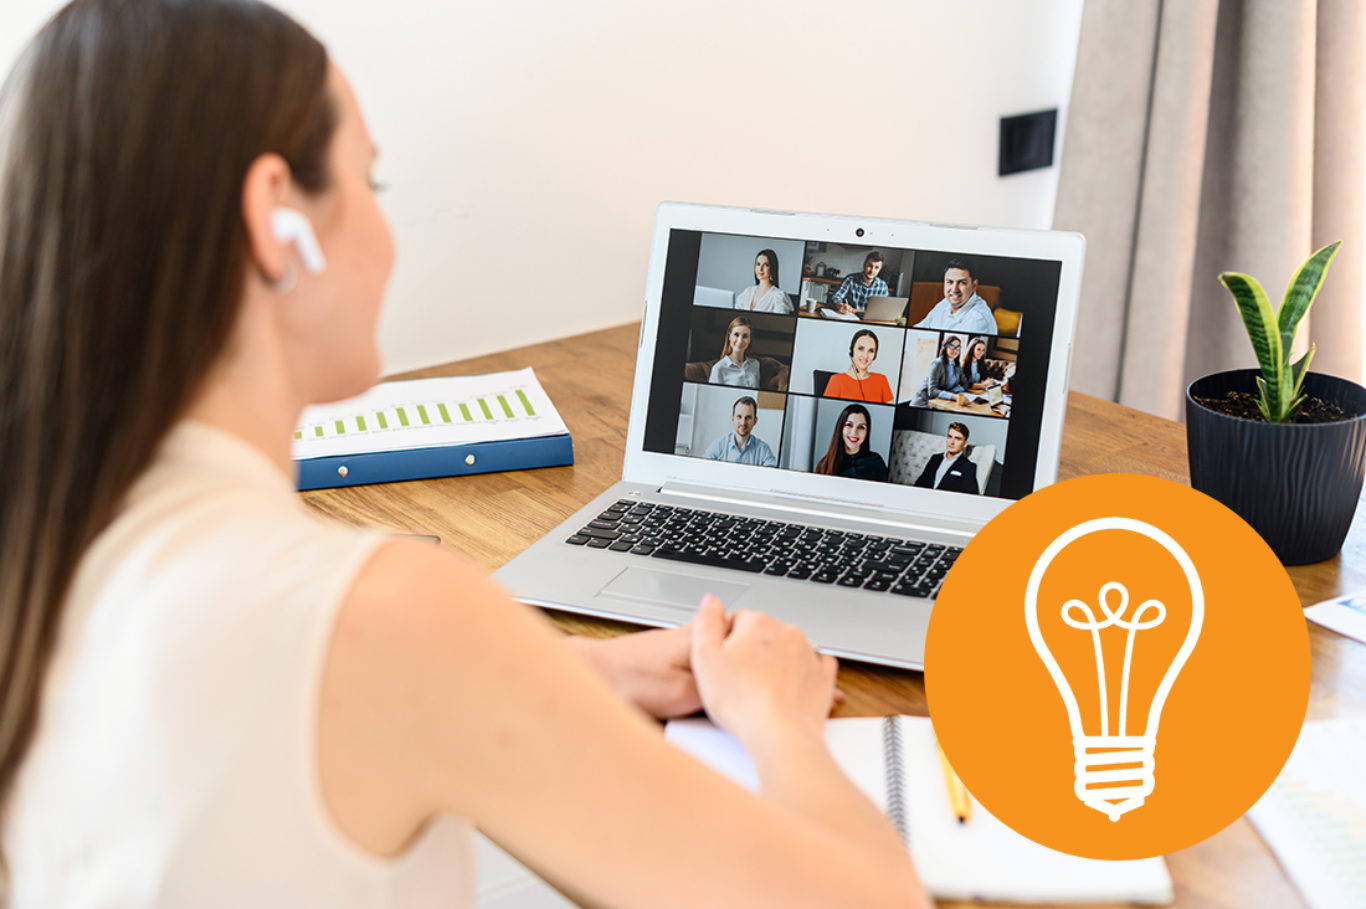 Virtual video conference, online meeting with a many employees together. A young woman is communicating via video call with coworkers, a several webcam shot of people on the laptop screen